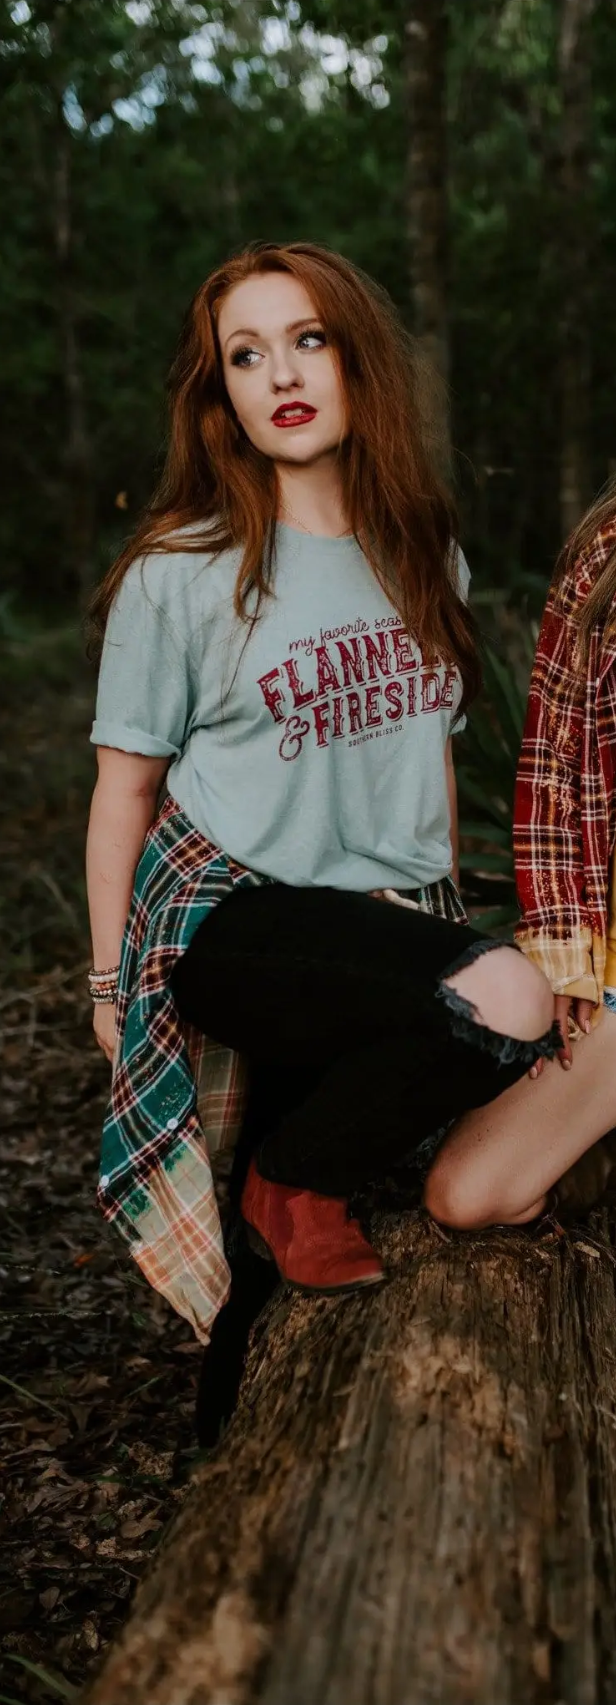 Flannels & Fireside Graphic Tee